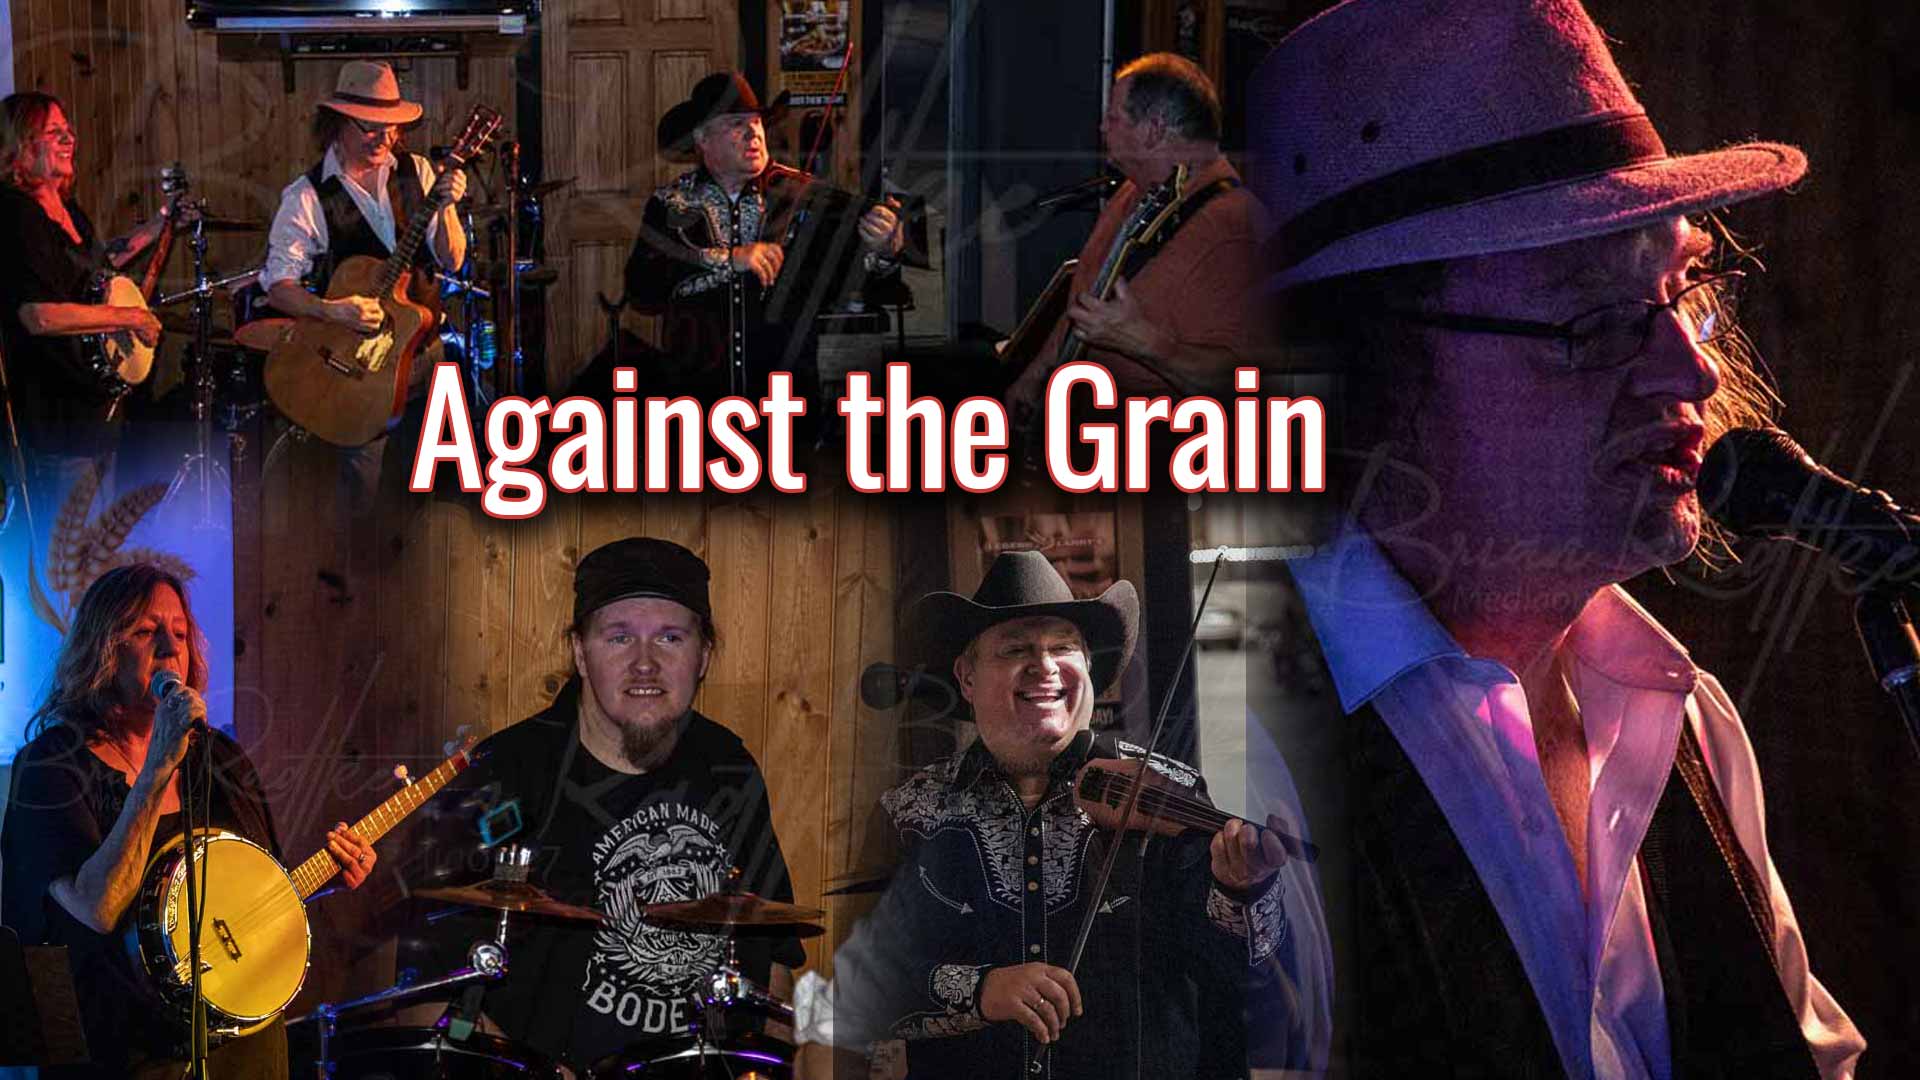 Against the Grain Band at Sturber's Bar and Grill in Kaukauna Wisconsin